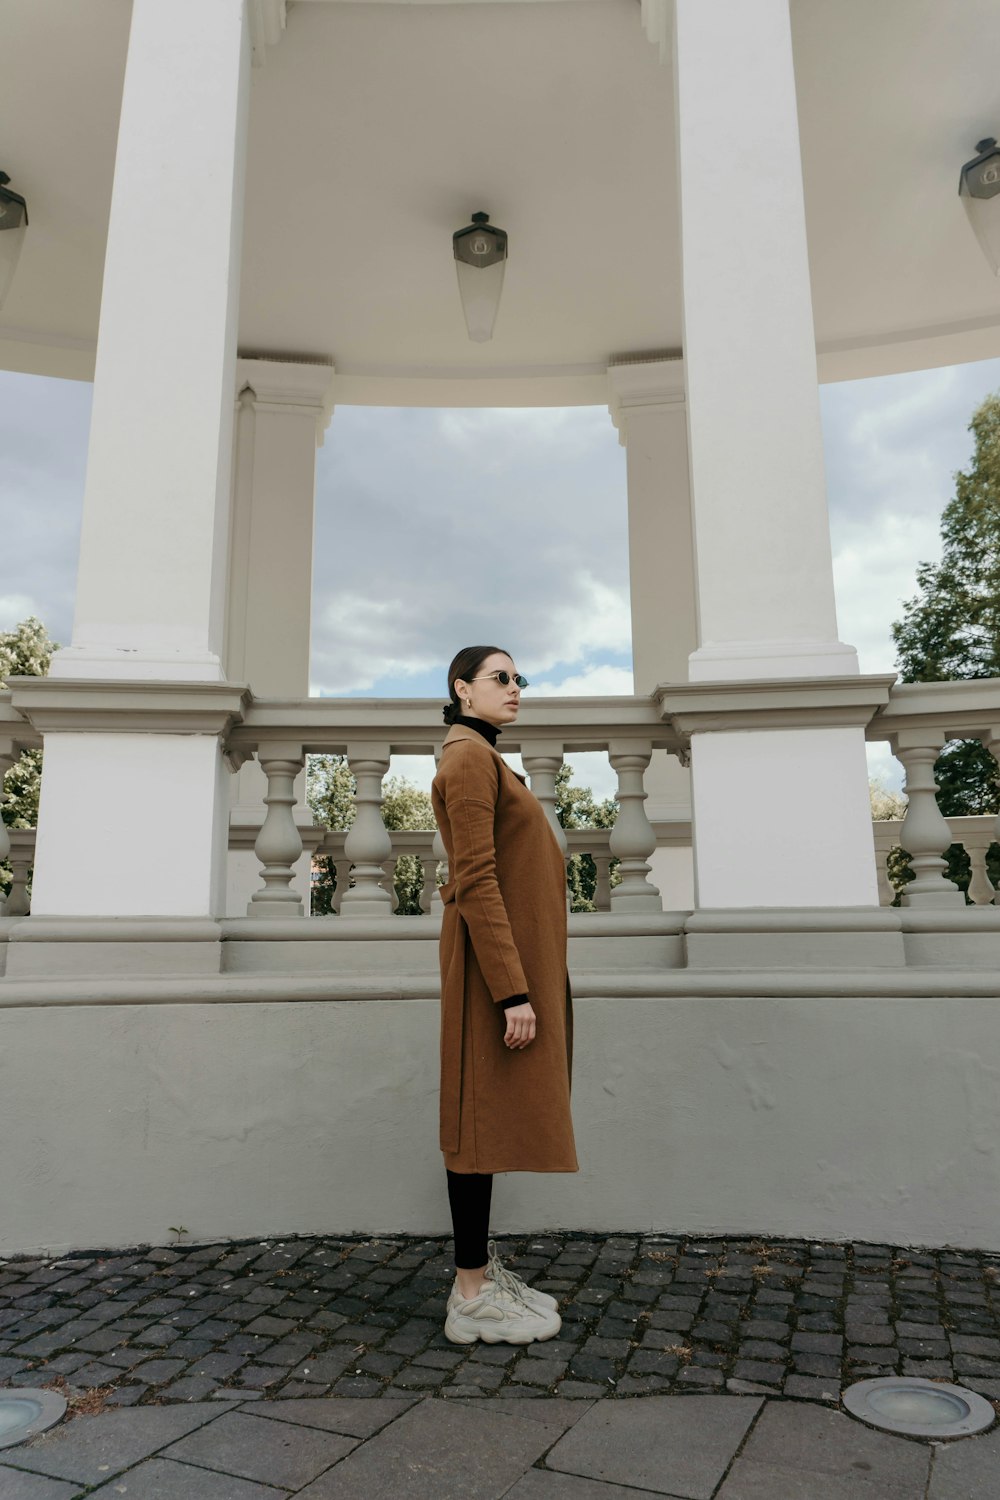 woman in brown coat standing near white concrete building during daytime